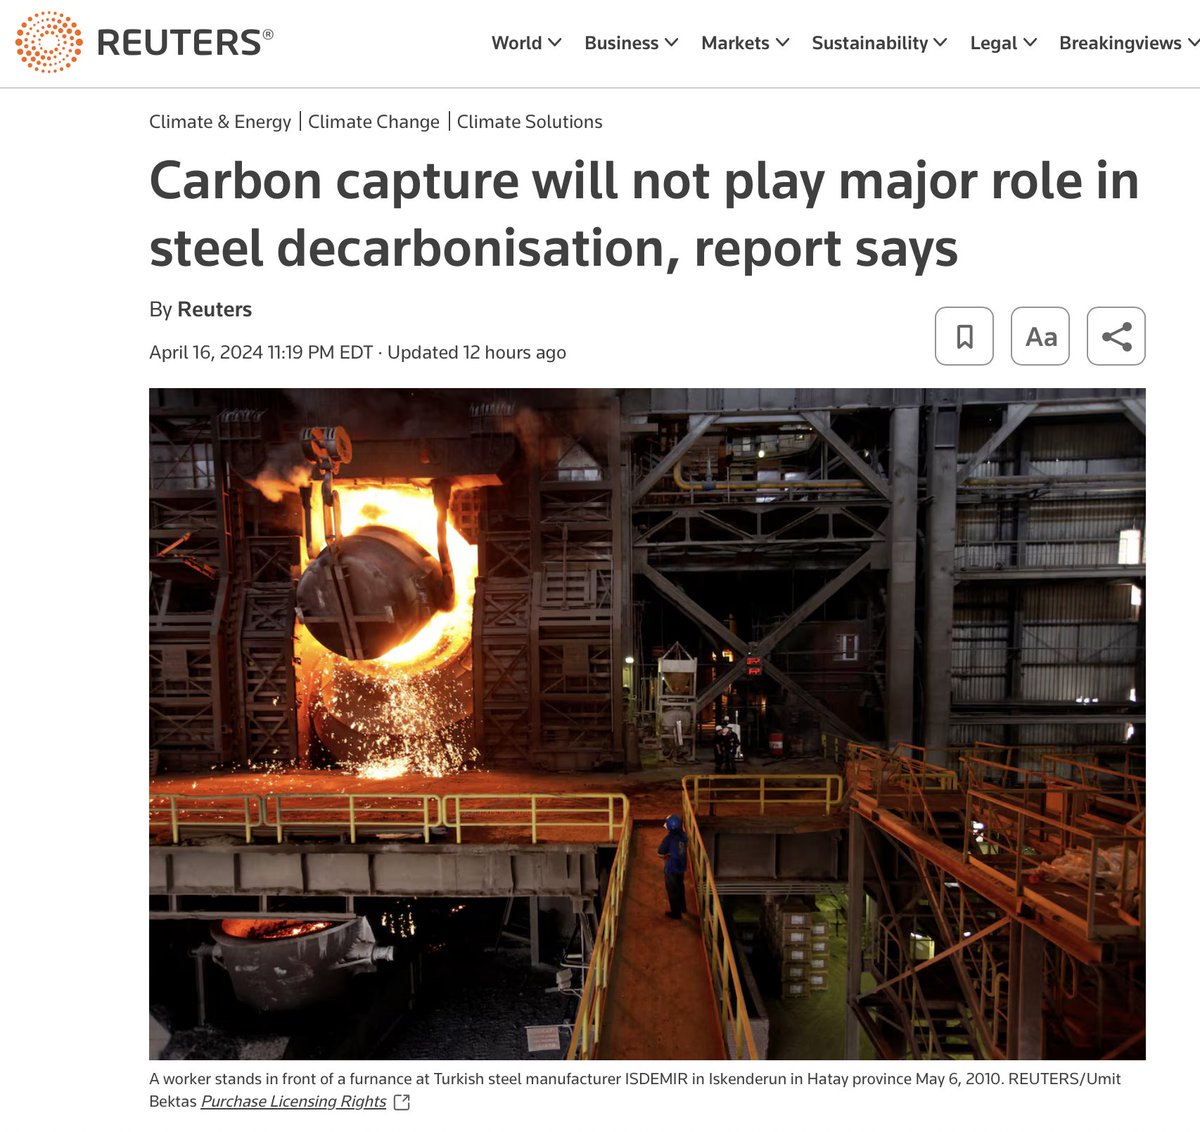 This applies to all CO2 capture efforts:

Carbon capture, utilization and storage (CCUS) is unlikely to play a major role in decarbonising the global steel industry due to low capture rates, high costs and a track record of underperformance.

reuters.com/business/energ…